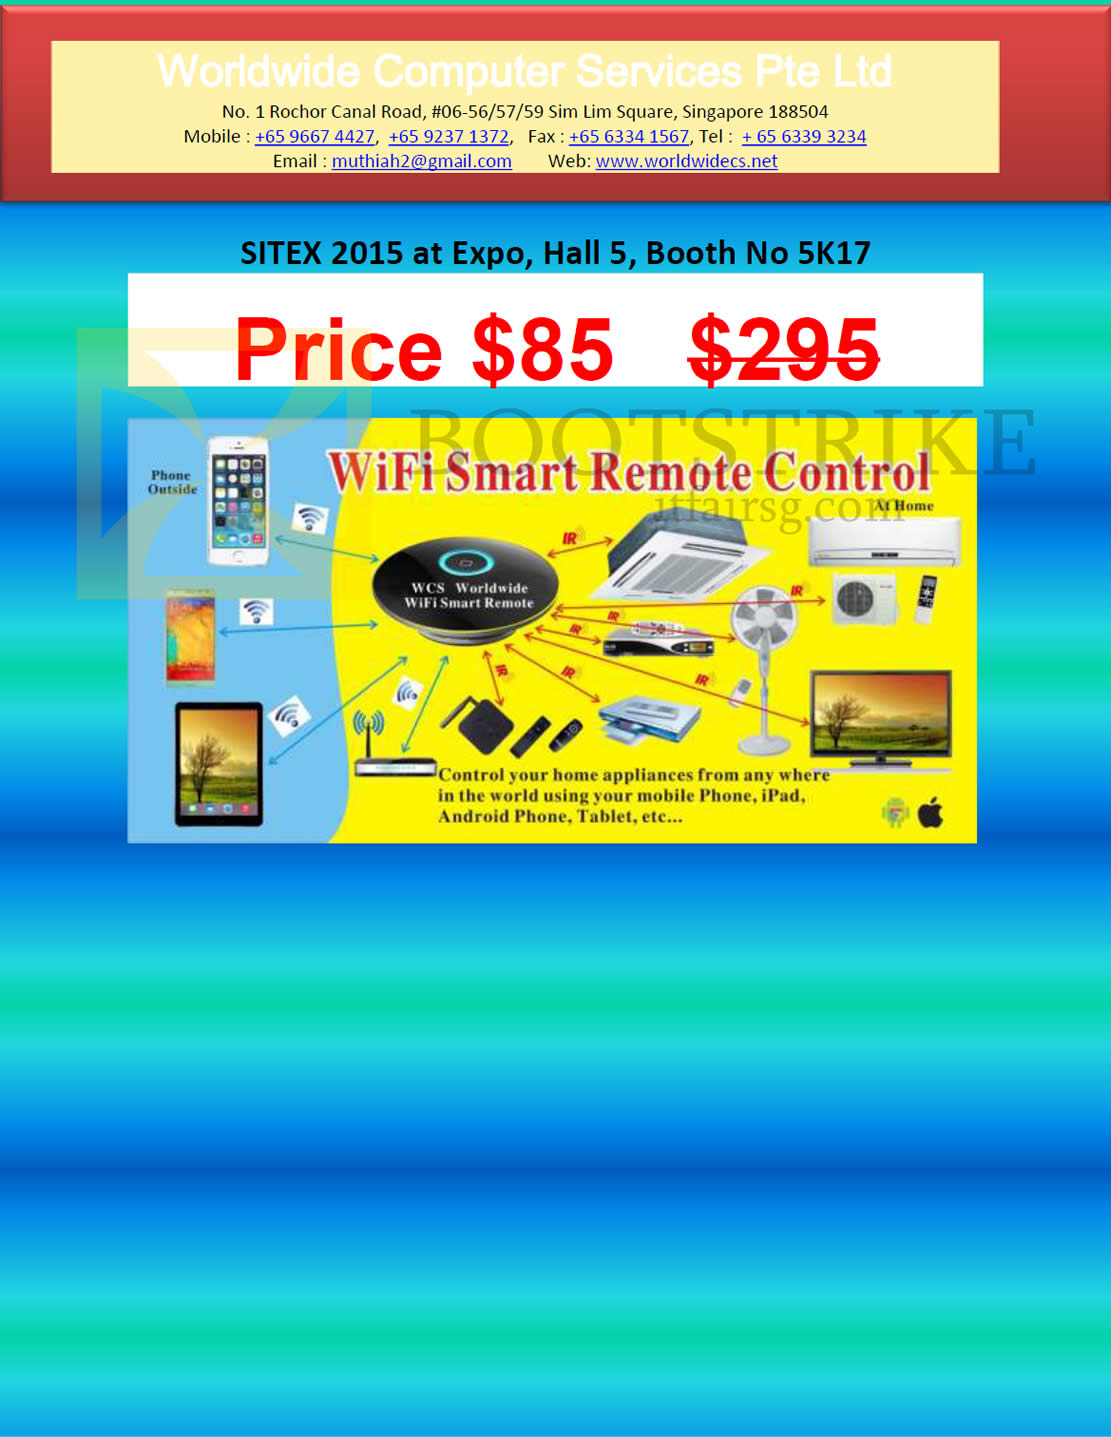 SITEX 2015 price list image brochure of Worldwide Computer Services Wifi Smart Remote Control